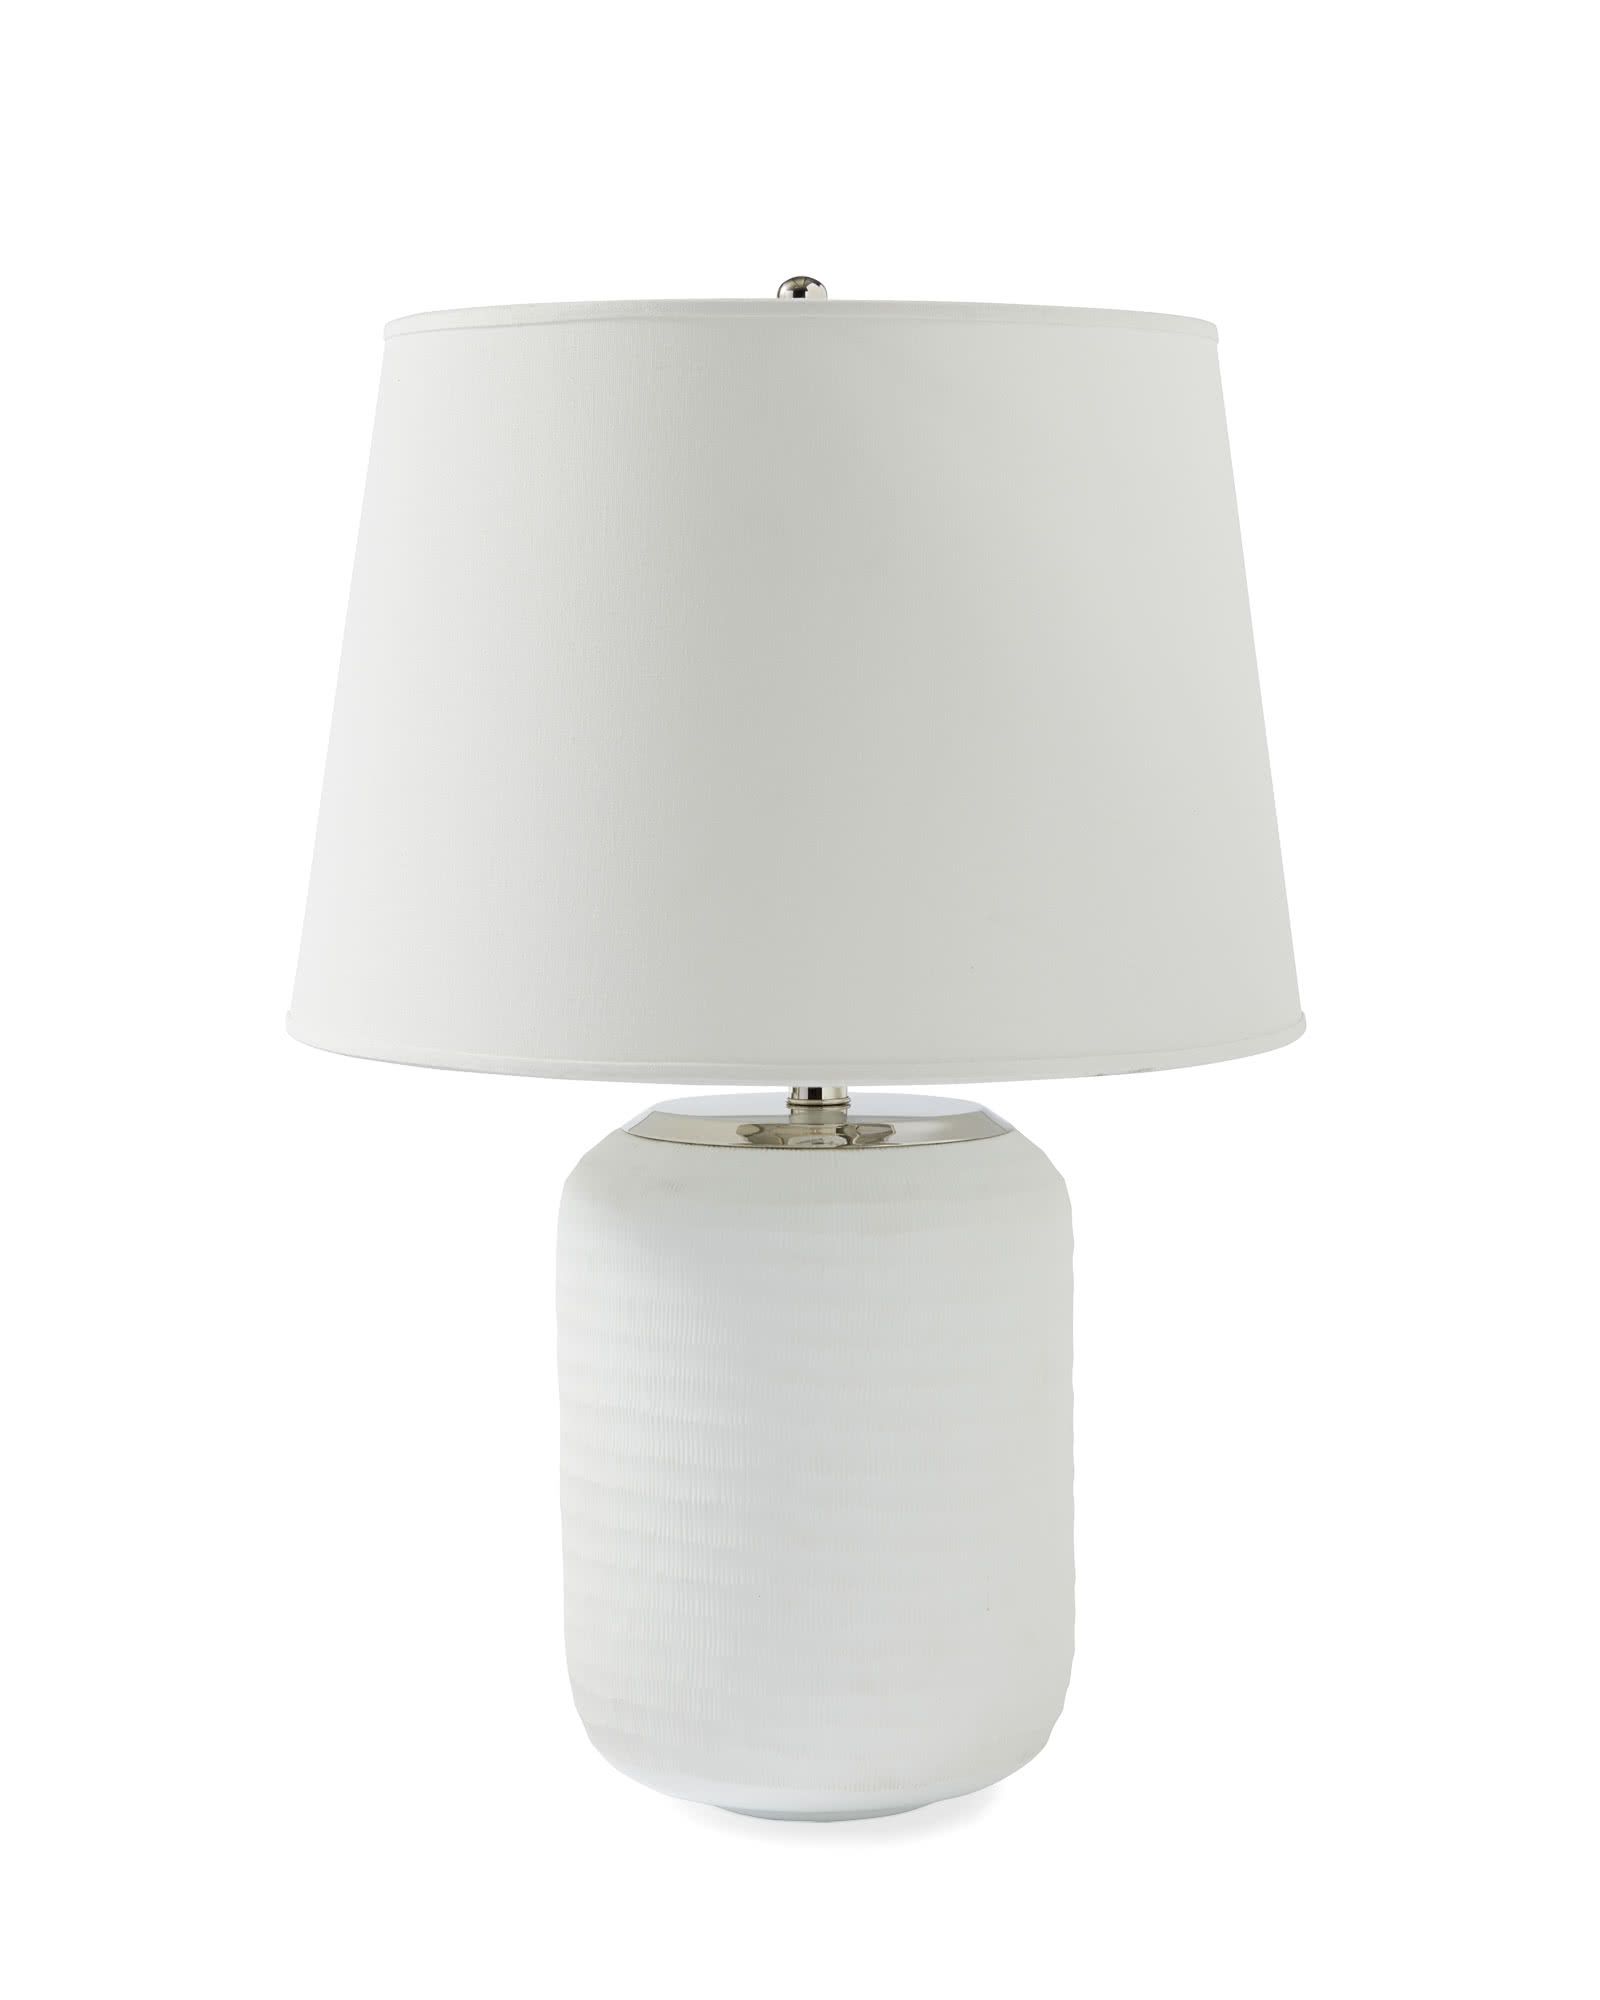 Calypso Table Lamp | Serena and Lily